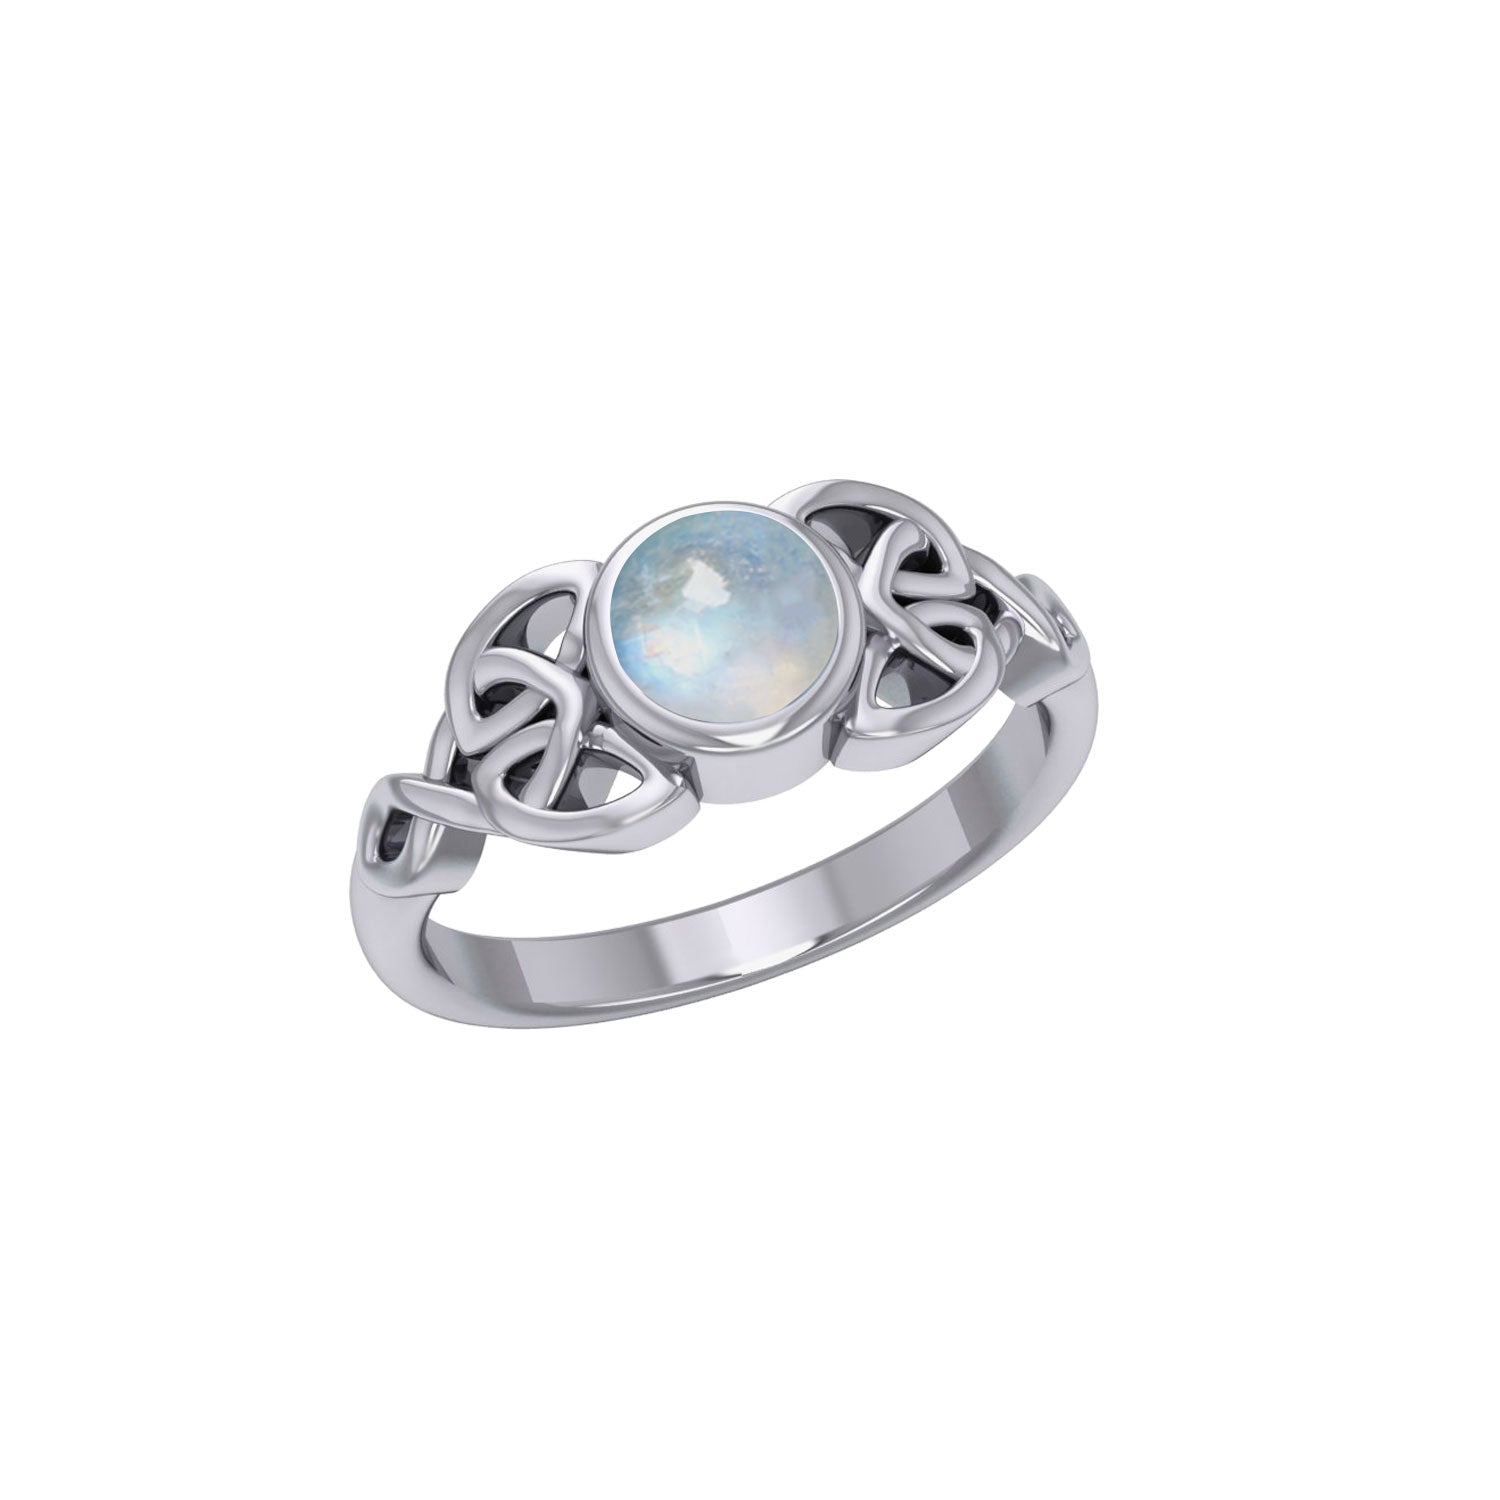 Celtic Knotwork and Gem Silver Ring TR3576